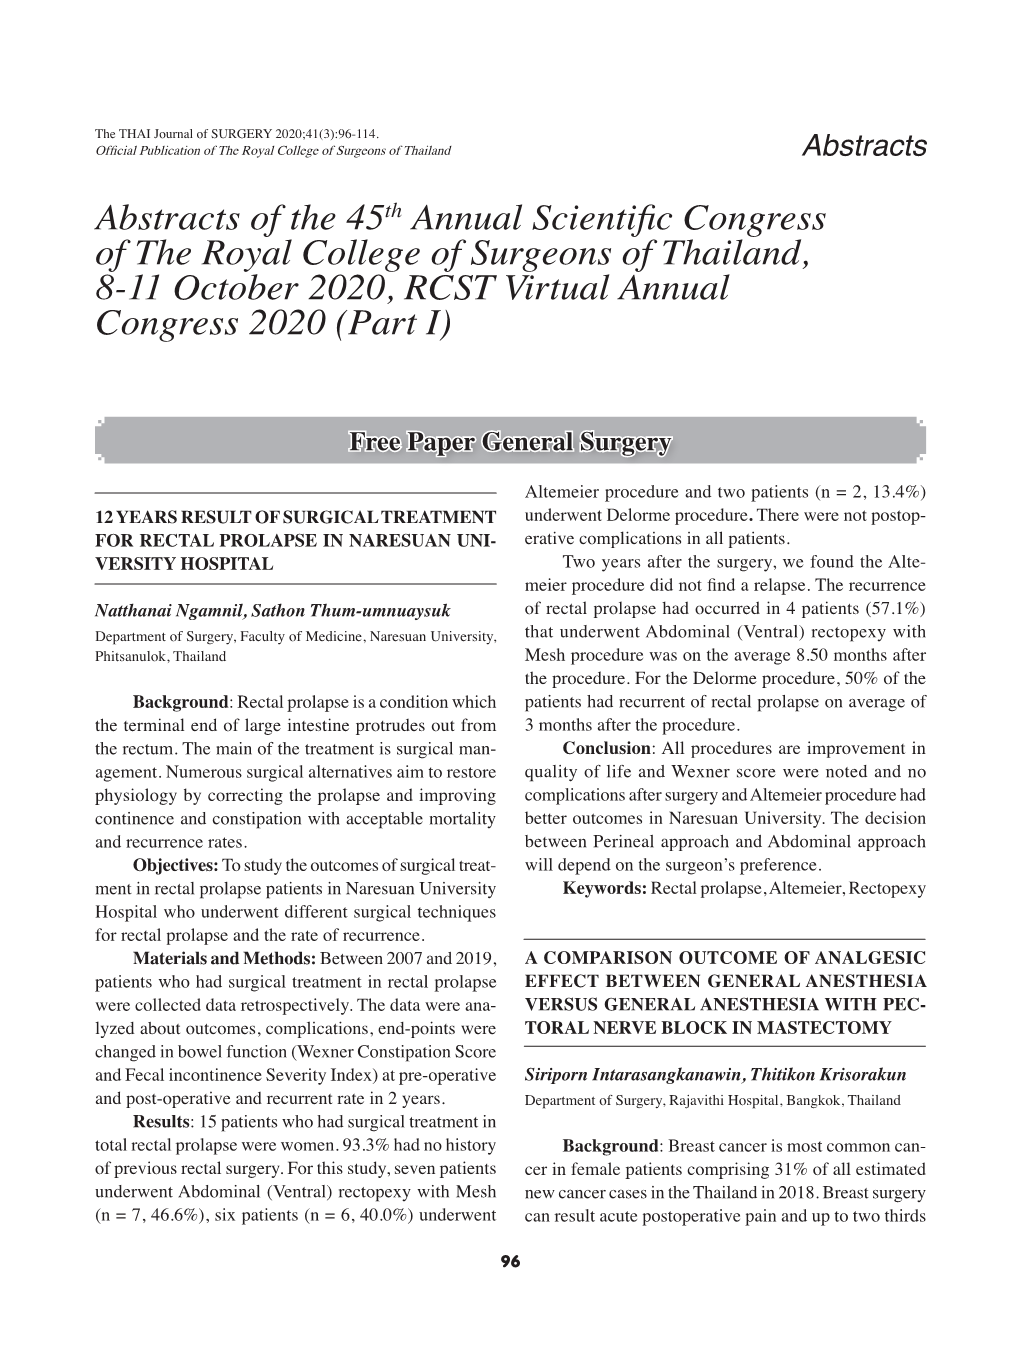 Abstracts of the 45Th Annual Scientific Congress of the Royal College of Surgeons of Thailand, 8-11 October 2020, RCST Virtual Annual Congress 2020 (Part I)